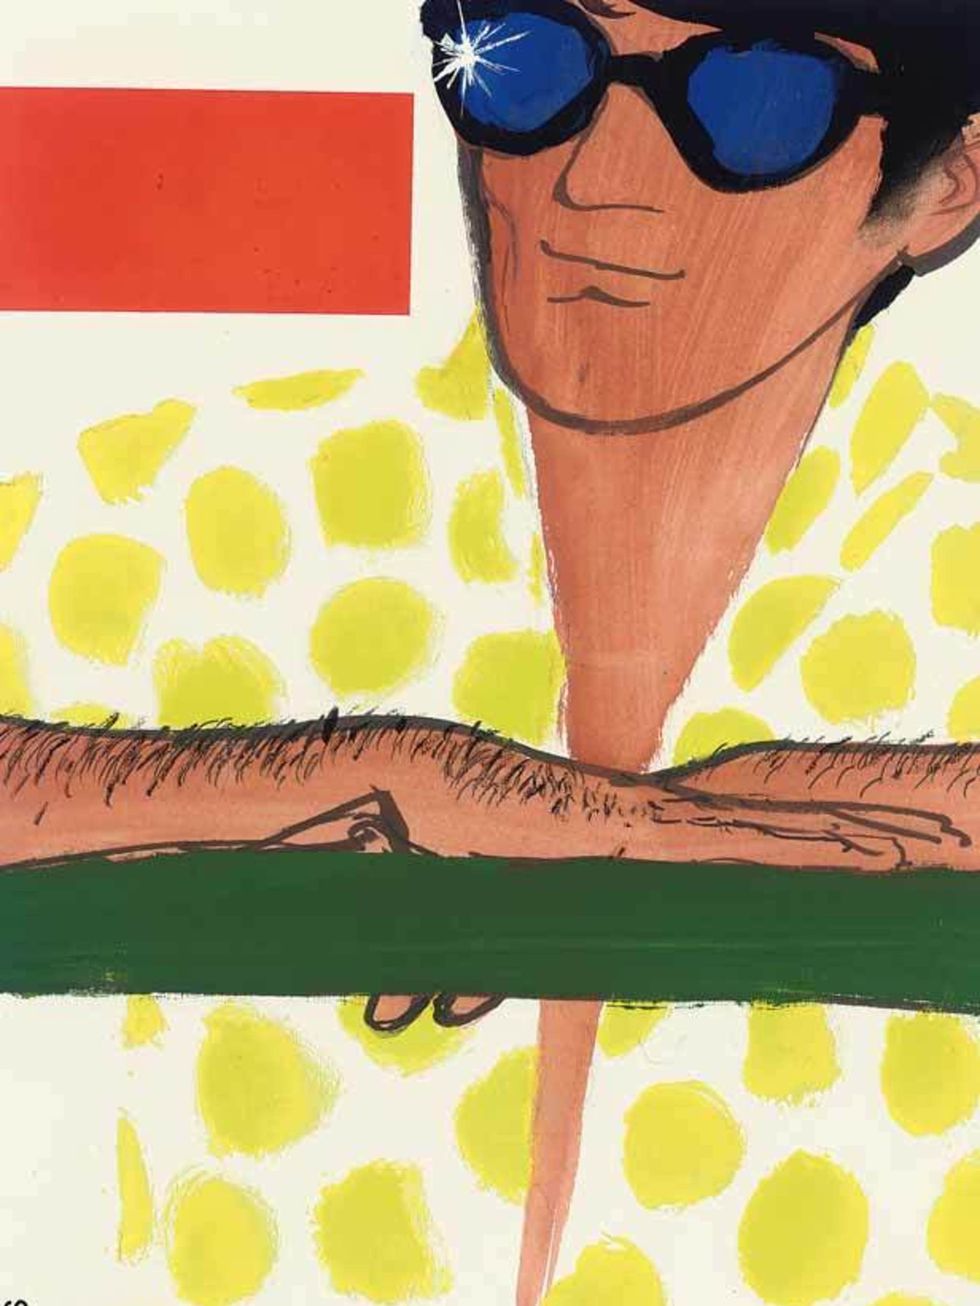 <p>A piece created for cover art in 1964, by the renowned illustrator René Gruau (1909-2004), who created some of the most iconic fashion images of the 20th century.</p><p>?</p>